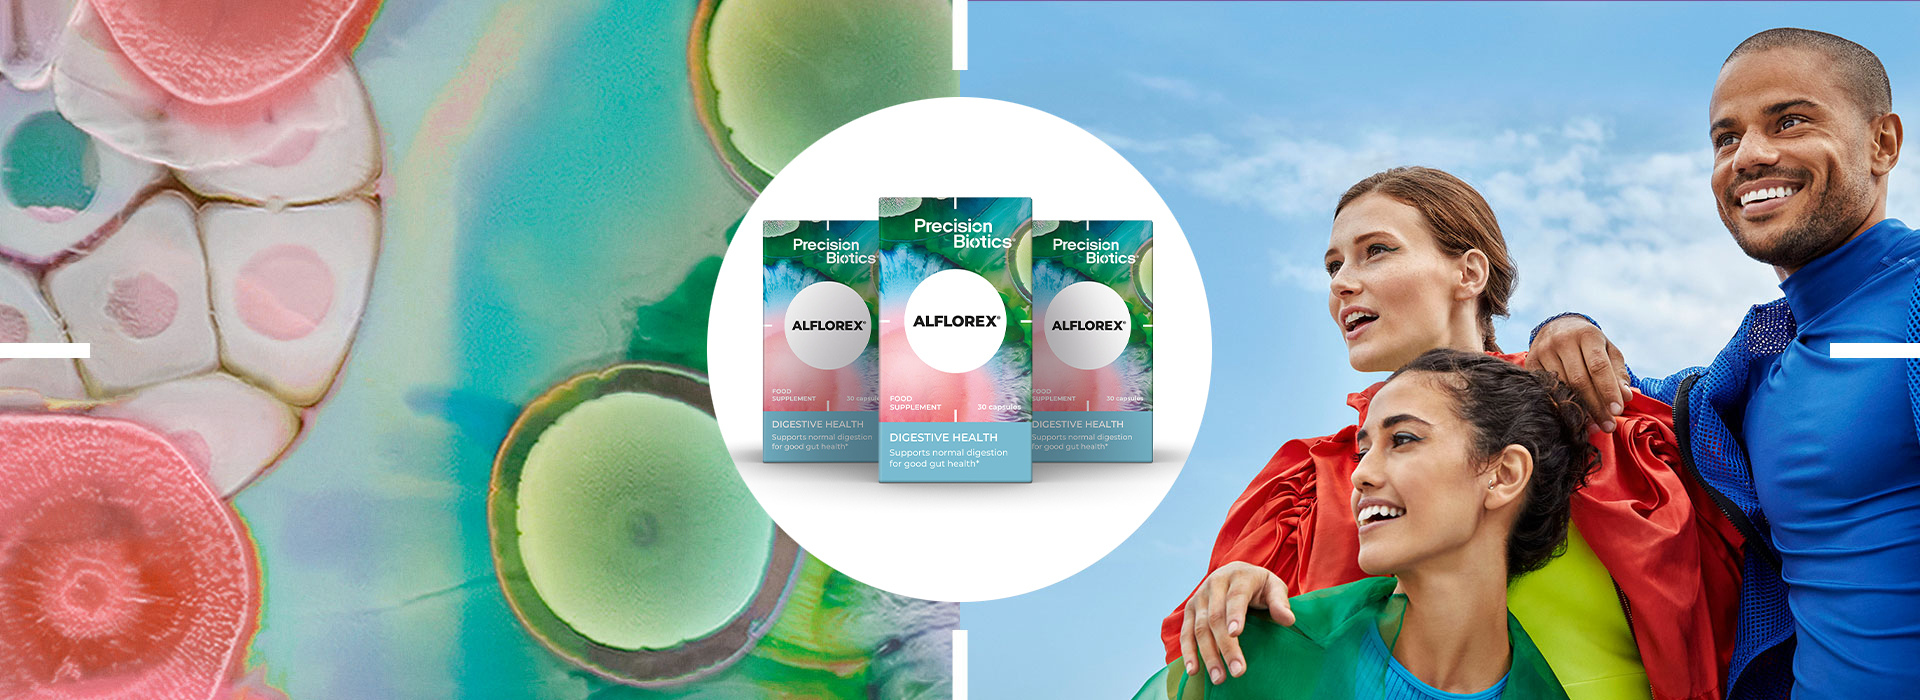 Alflorex digestive health Supplements on the colourful background.